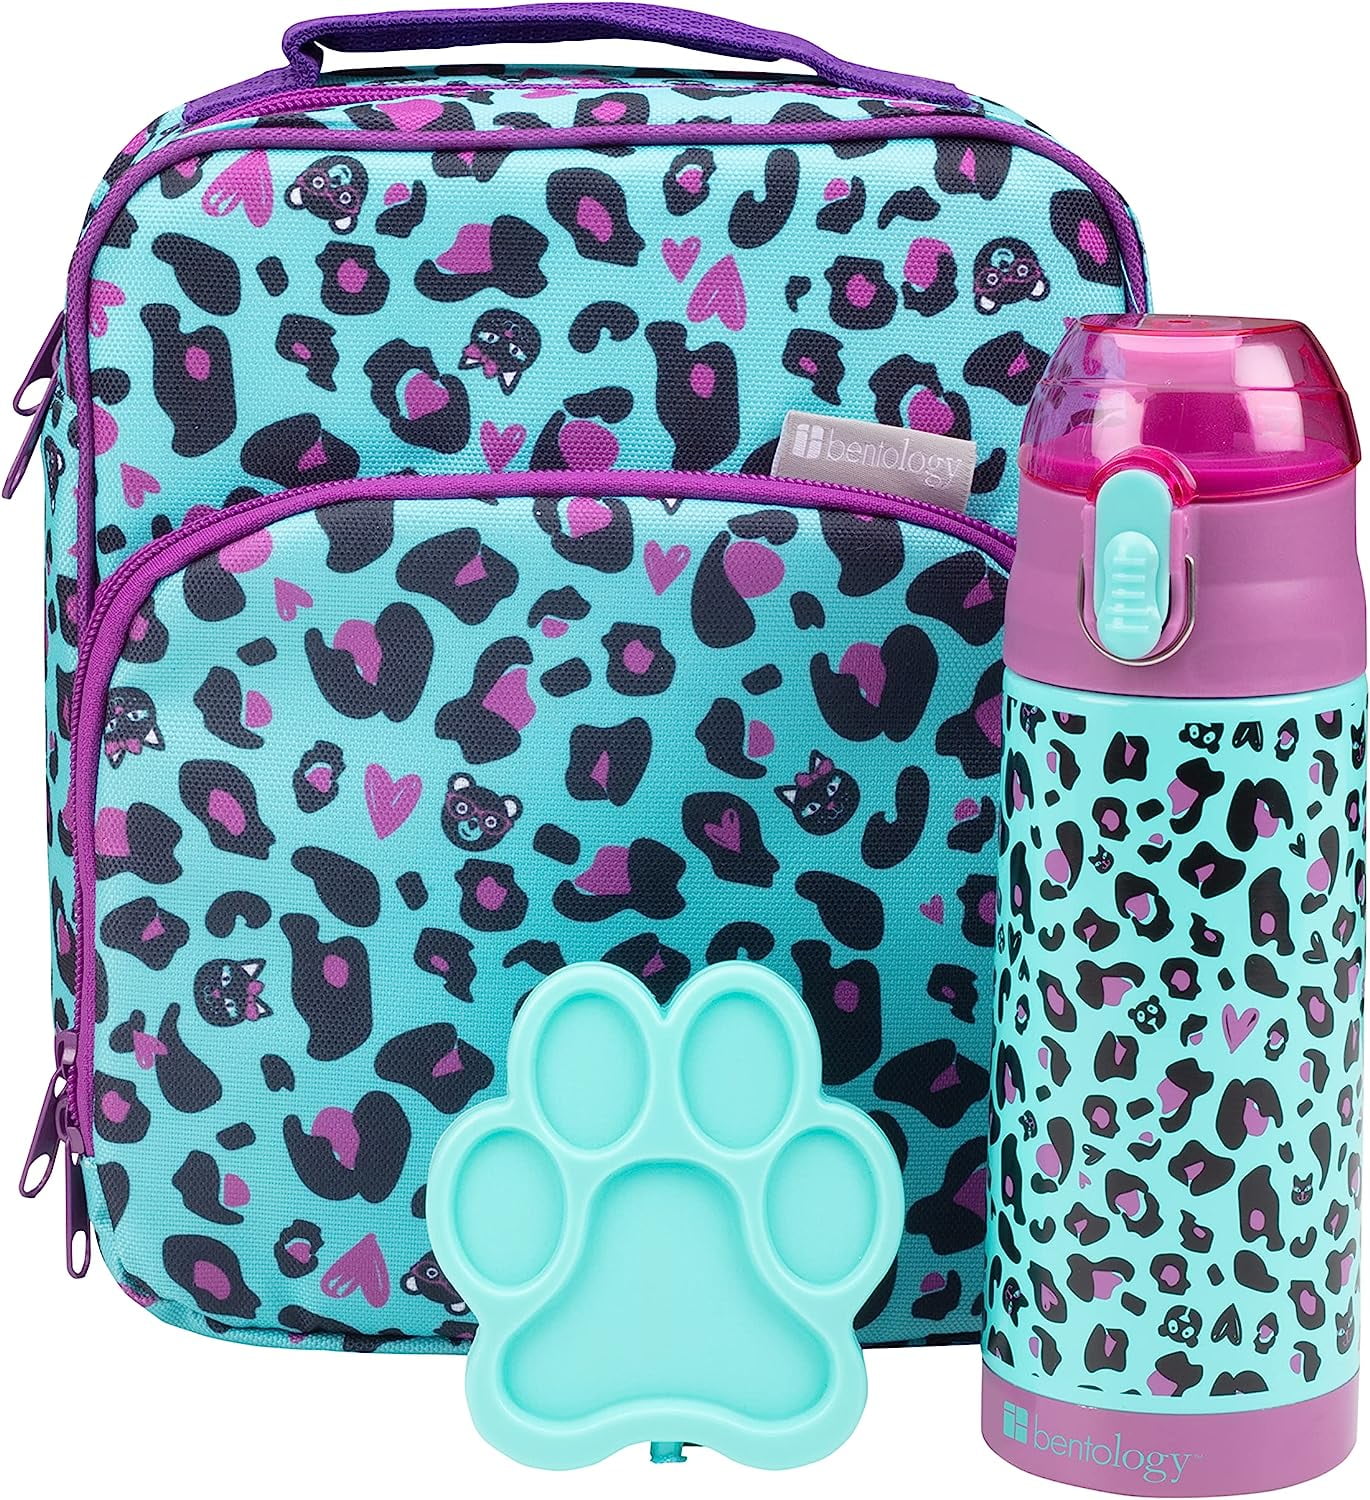 Bentology Lunch Box Set for Kids - Girls Insulated Lunchbox Tote, Water  Bottle, and Ice Pack - 3 Pieces - Unicorn